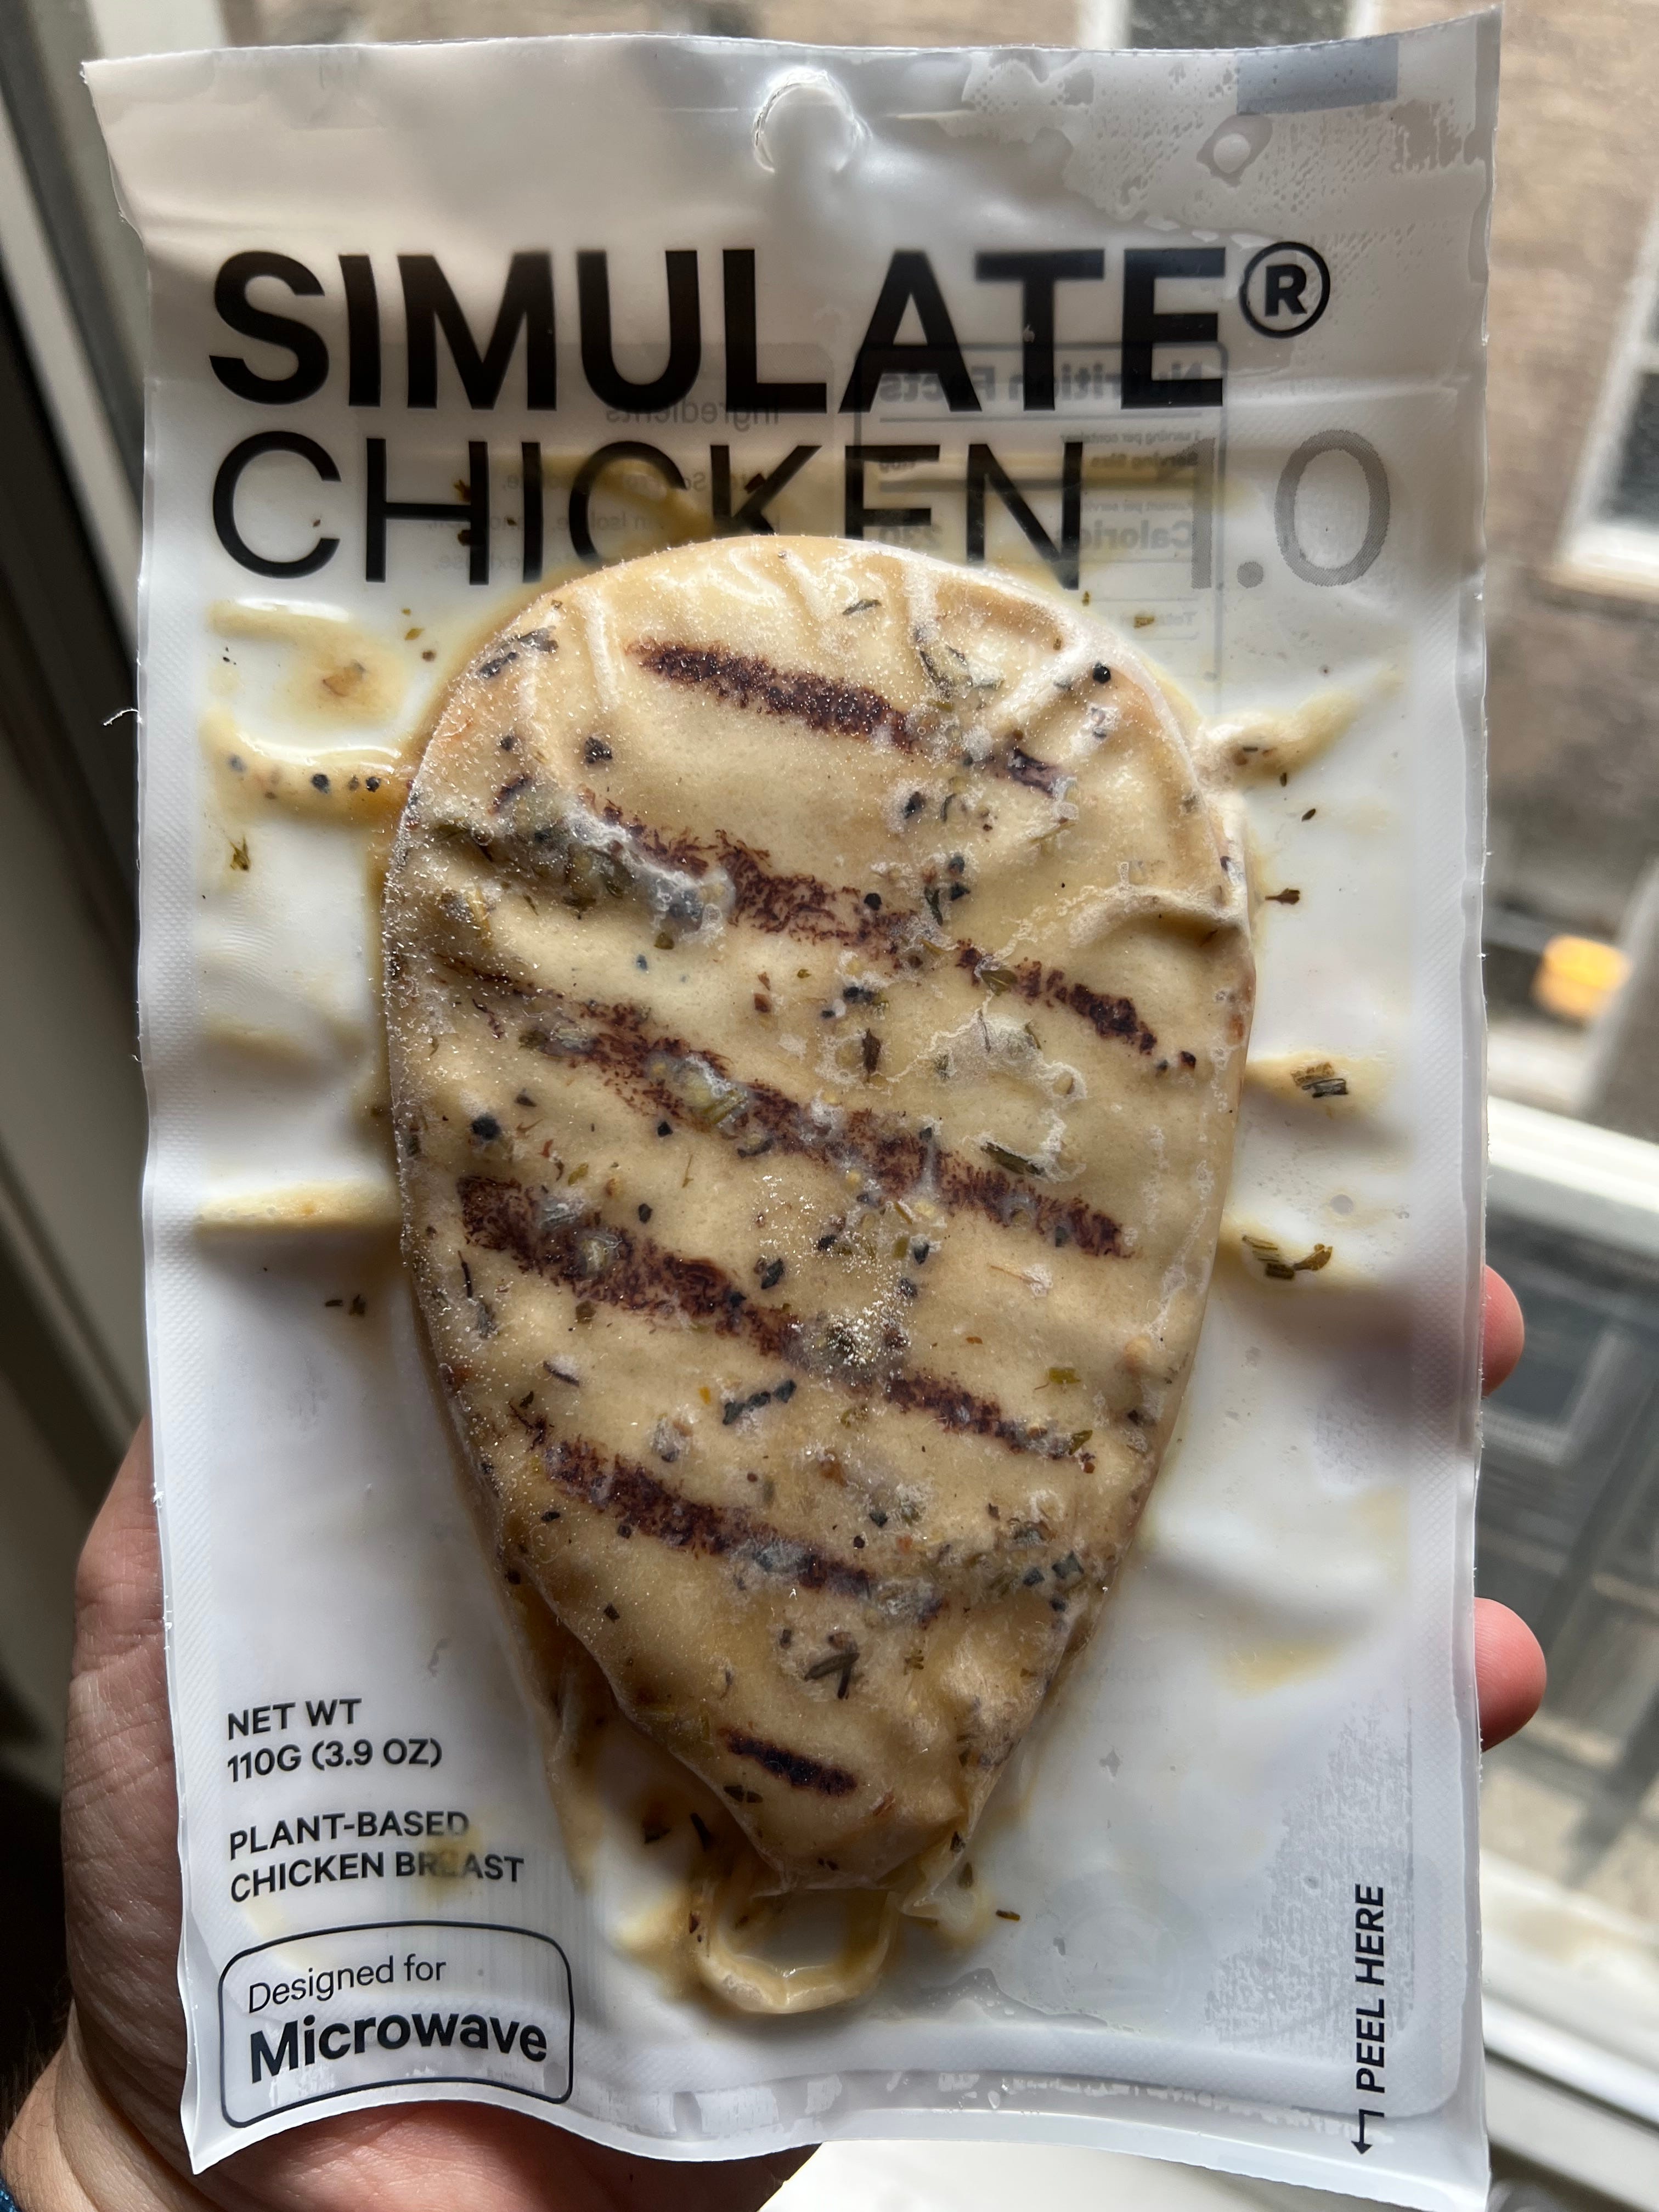 Simulate Chicken breast straight from the freezer.